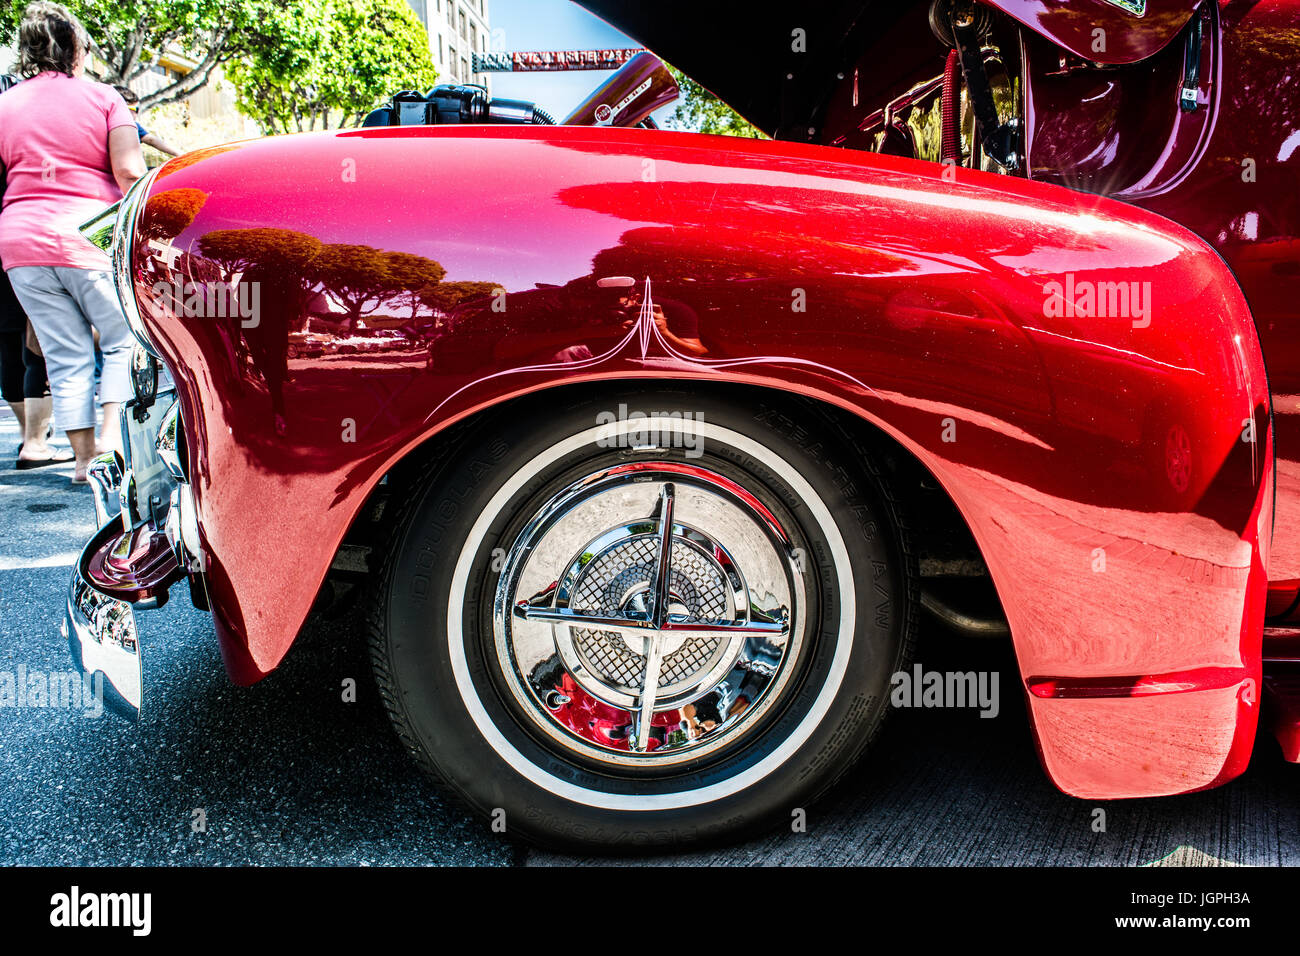 Classic Cherry Red car on display at the 17th Annual Uptown Whittier  Carshow Stock Photo - Alamy